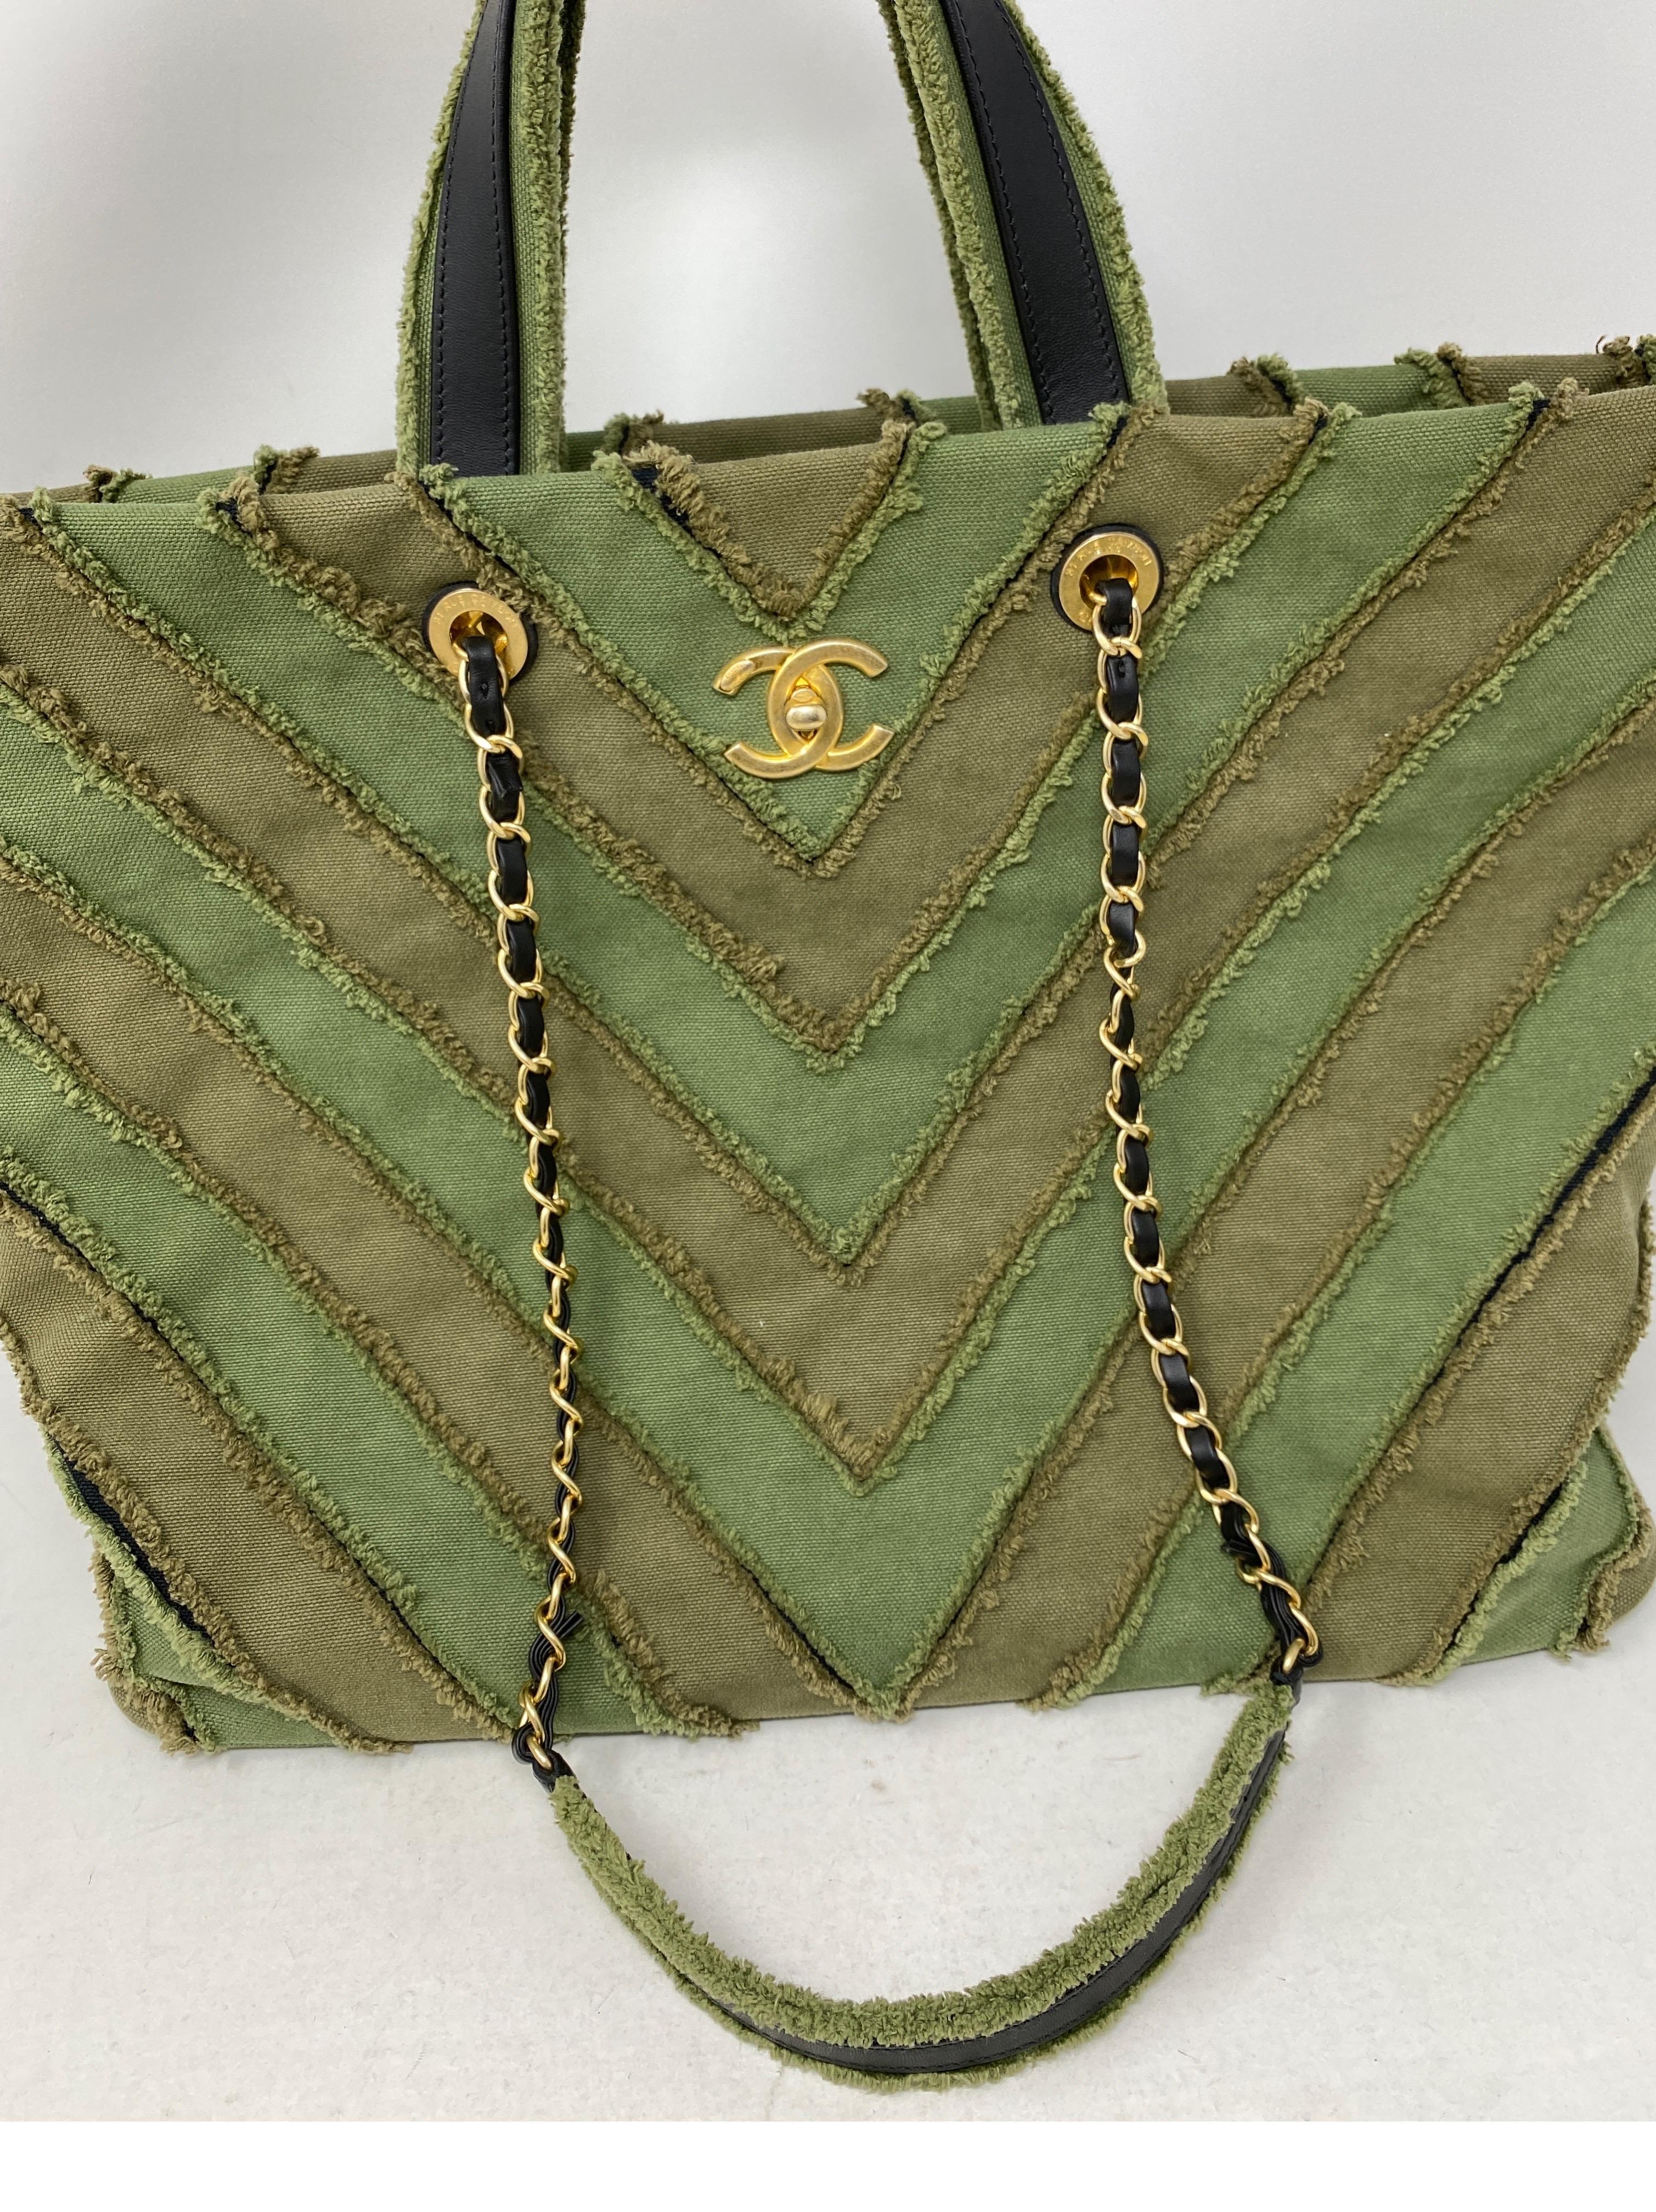 Chanel Canvas Patchwork Shopper Tote from Cruise Collection. Unique khaki green chevron pattern tote bag. Rare and limited collection. Gold hardware. Big collector's piece. Includes authenticity card. Guaranteed authentic. 